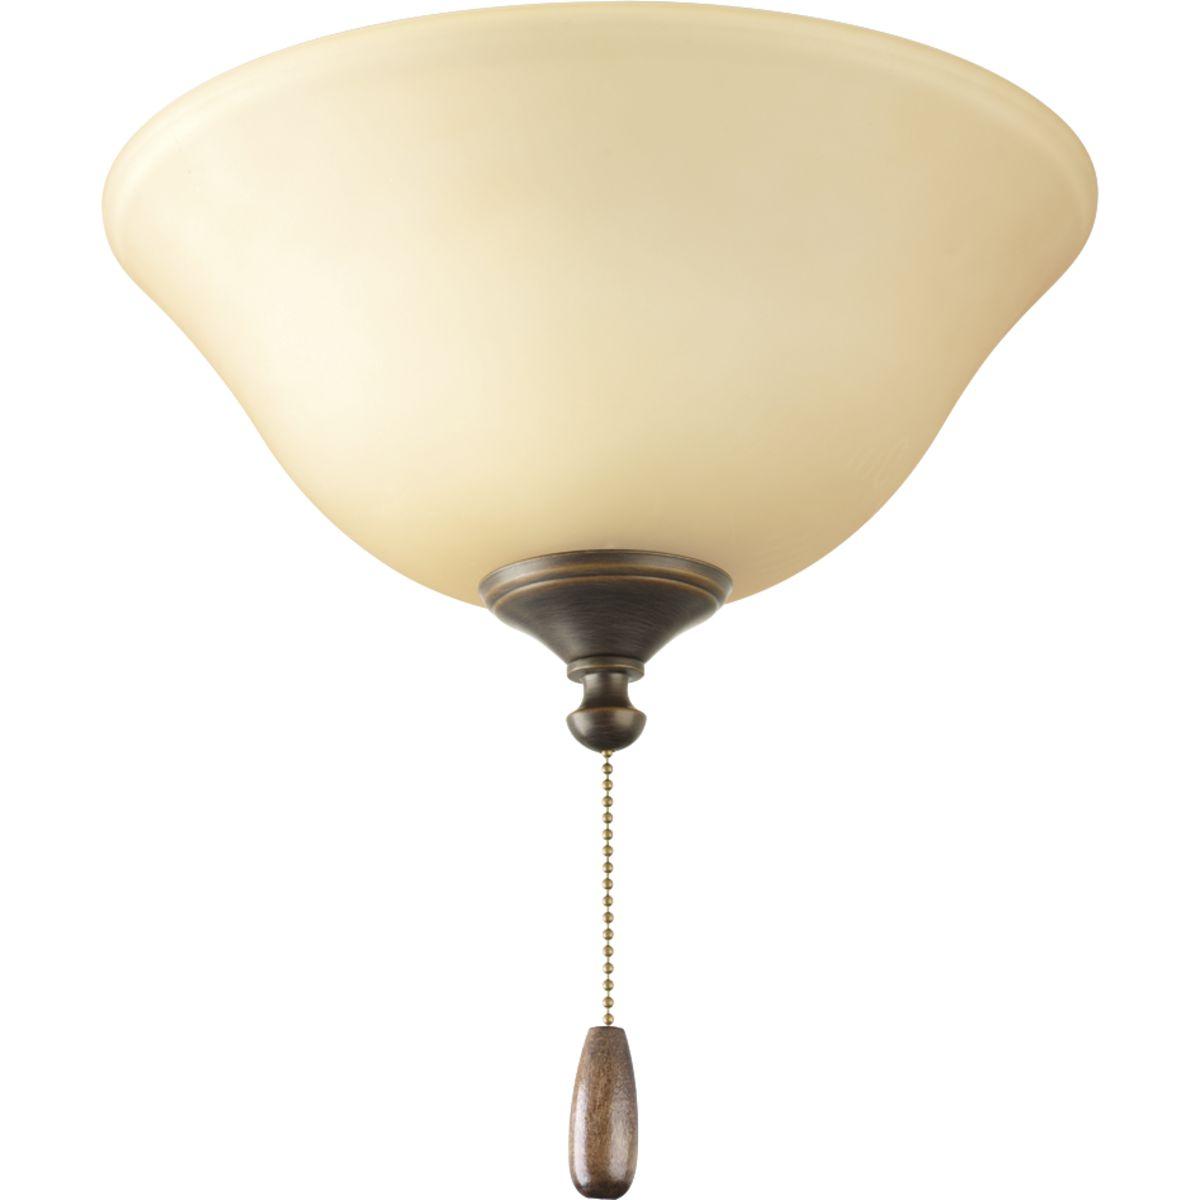 Hubbell P2612-20TWB Antique Bronze two-light fan kit with etched Light Umber glass bowl. Elegant light umber glass conceals light bulbs and casts an inviting illumination in any size room. Universal style lets you use with any indoor fan that accept an accessory light. Quick